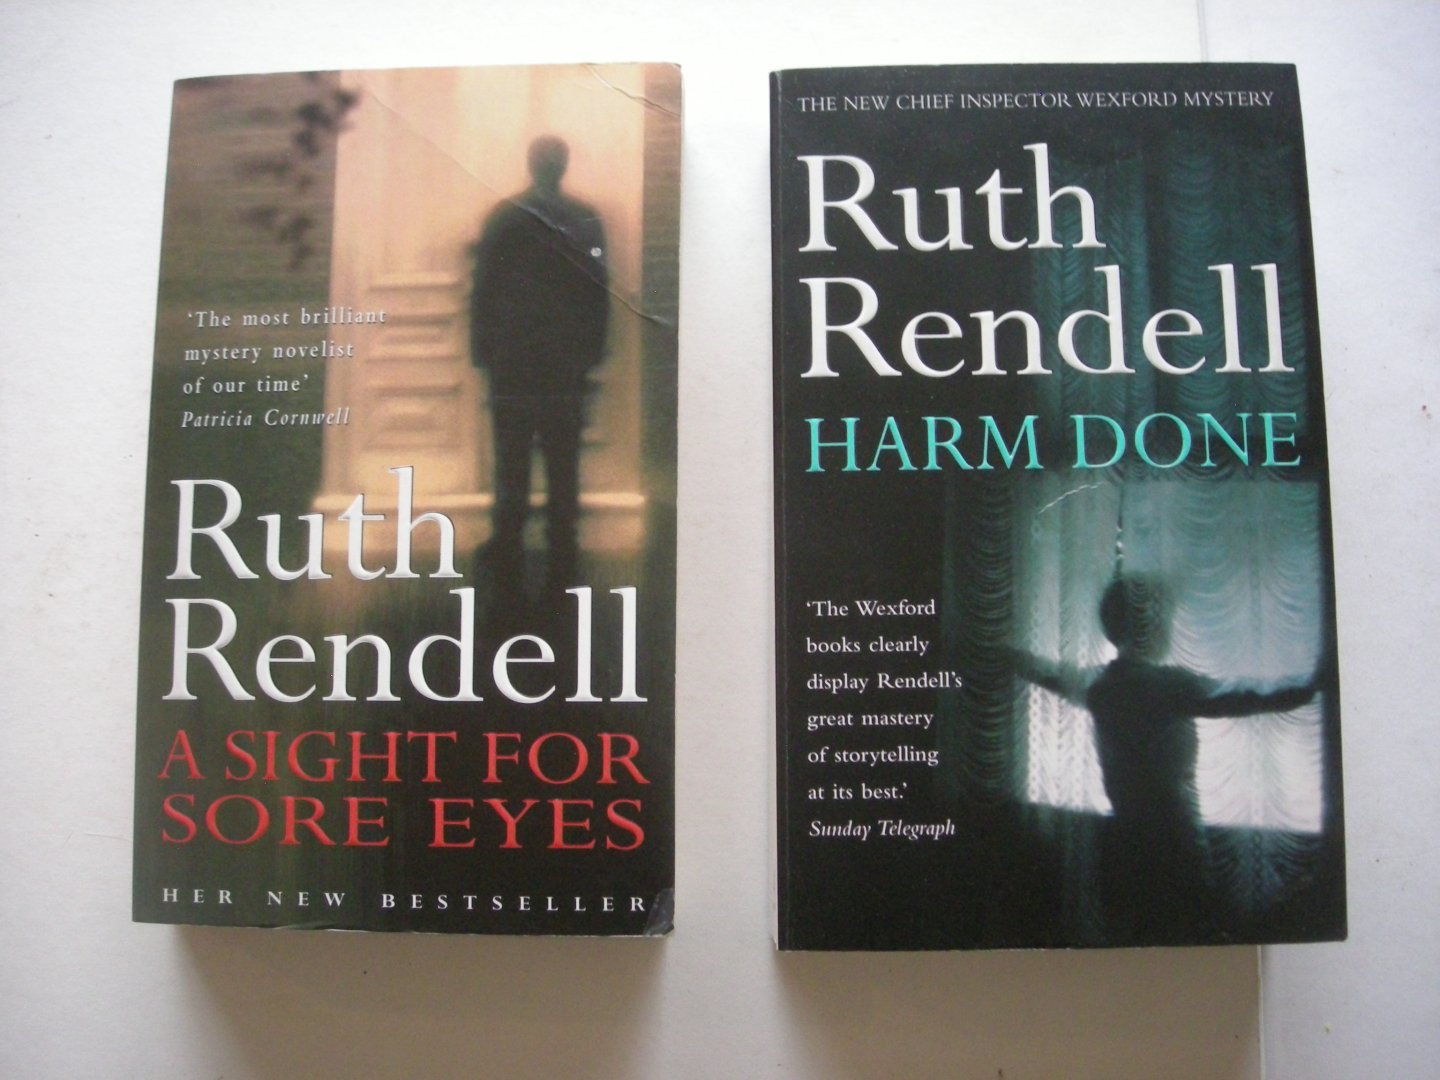 Rendell, Ruth - Harm done (Wexford mystery)